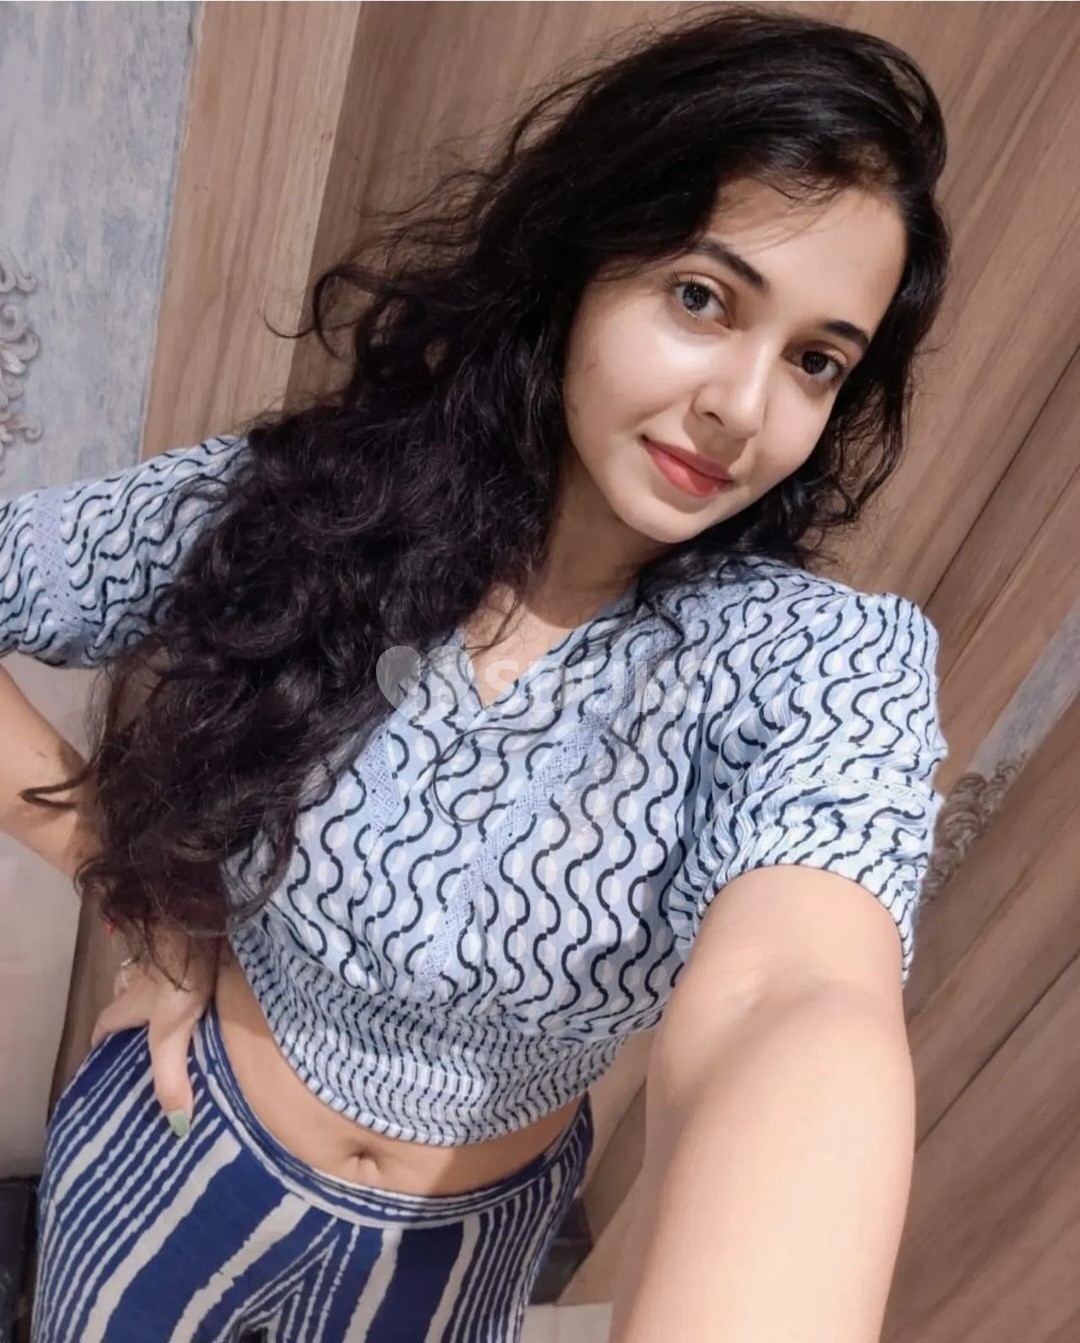 Alwar ✅ 100 % SAFE AND SECURE TODAY LOW PRICE UNLIMITED ENJOY HOT COLLEGE GIRL HOUSEWIFE  AVAILABLE,,